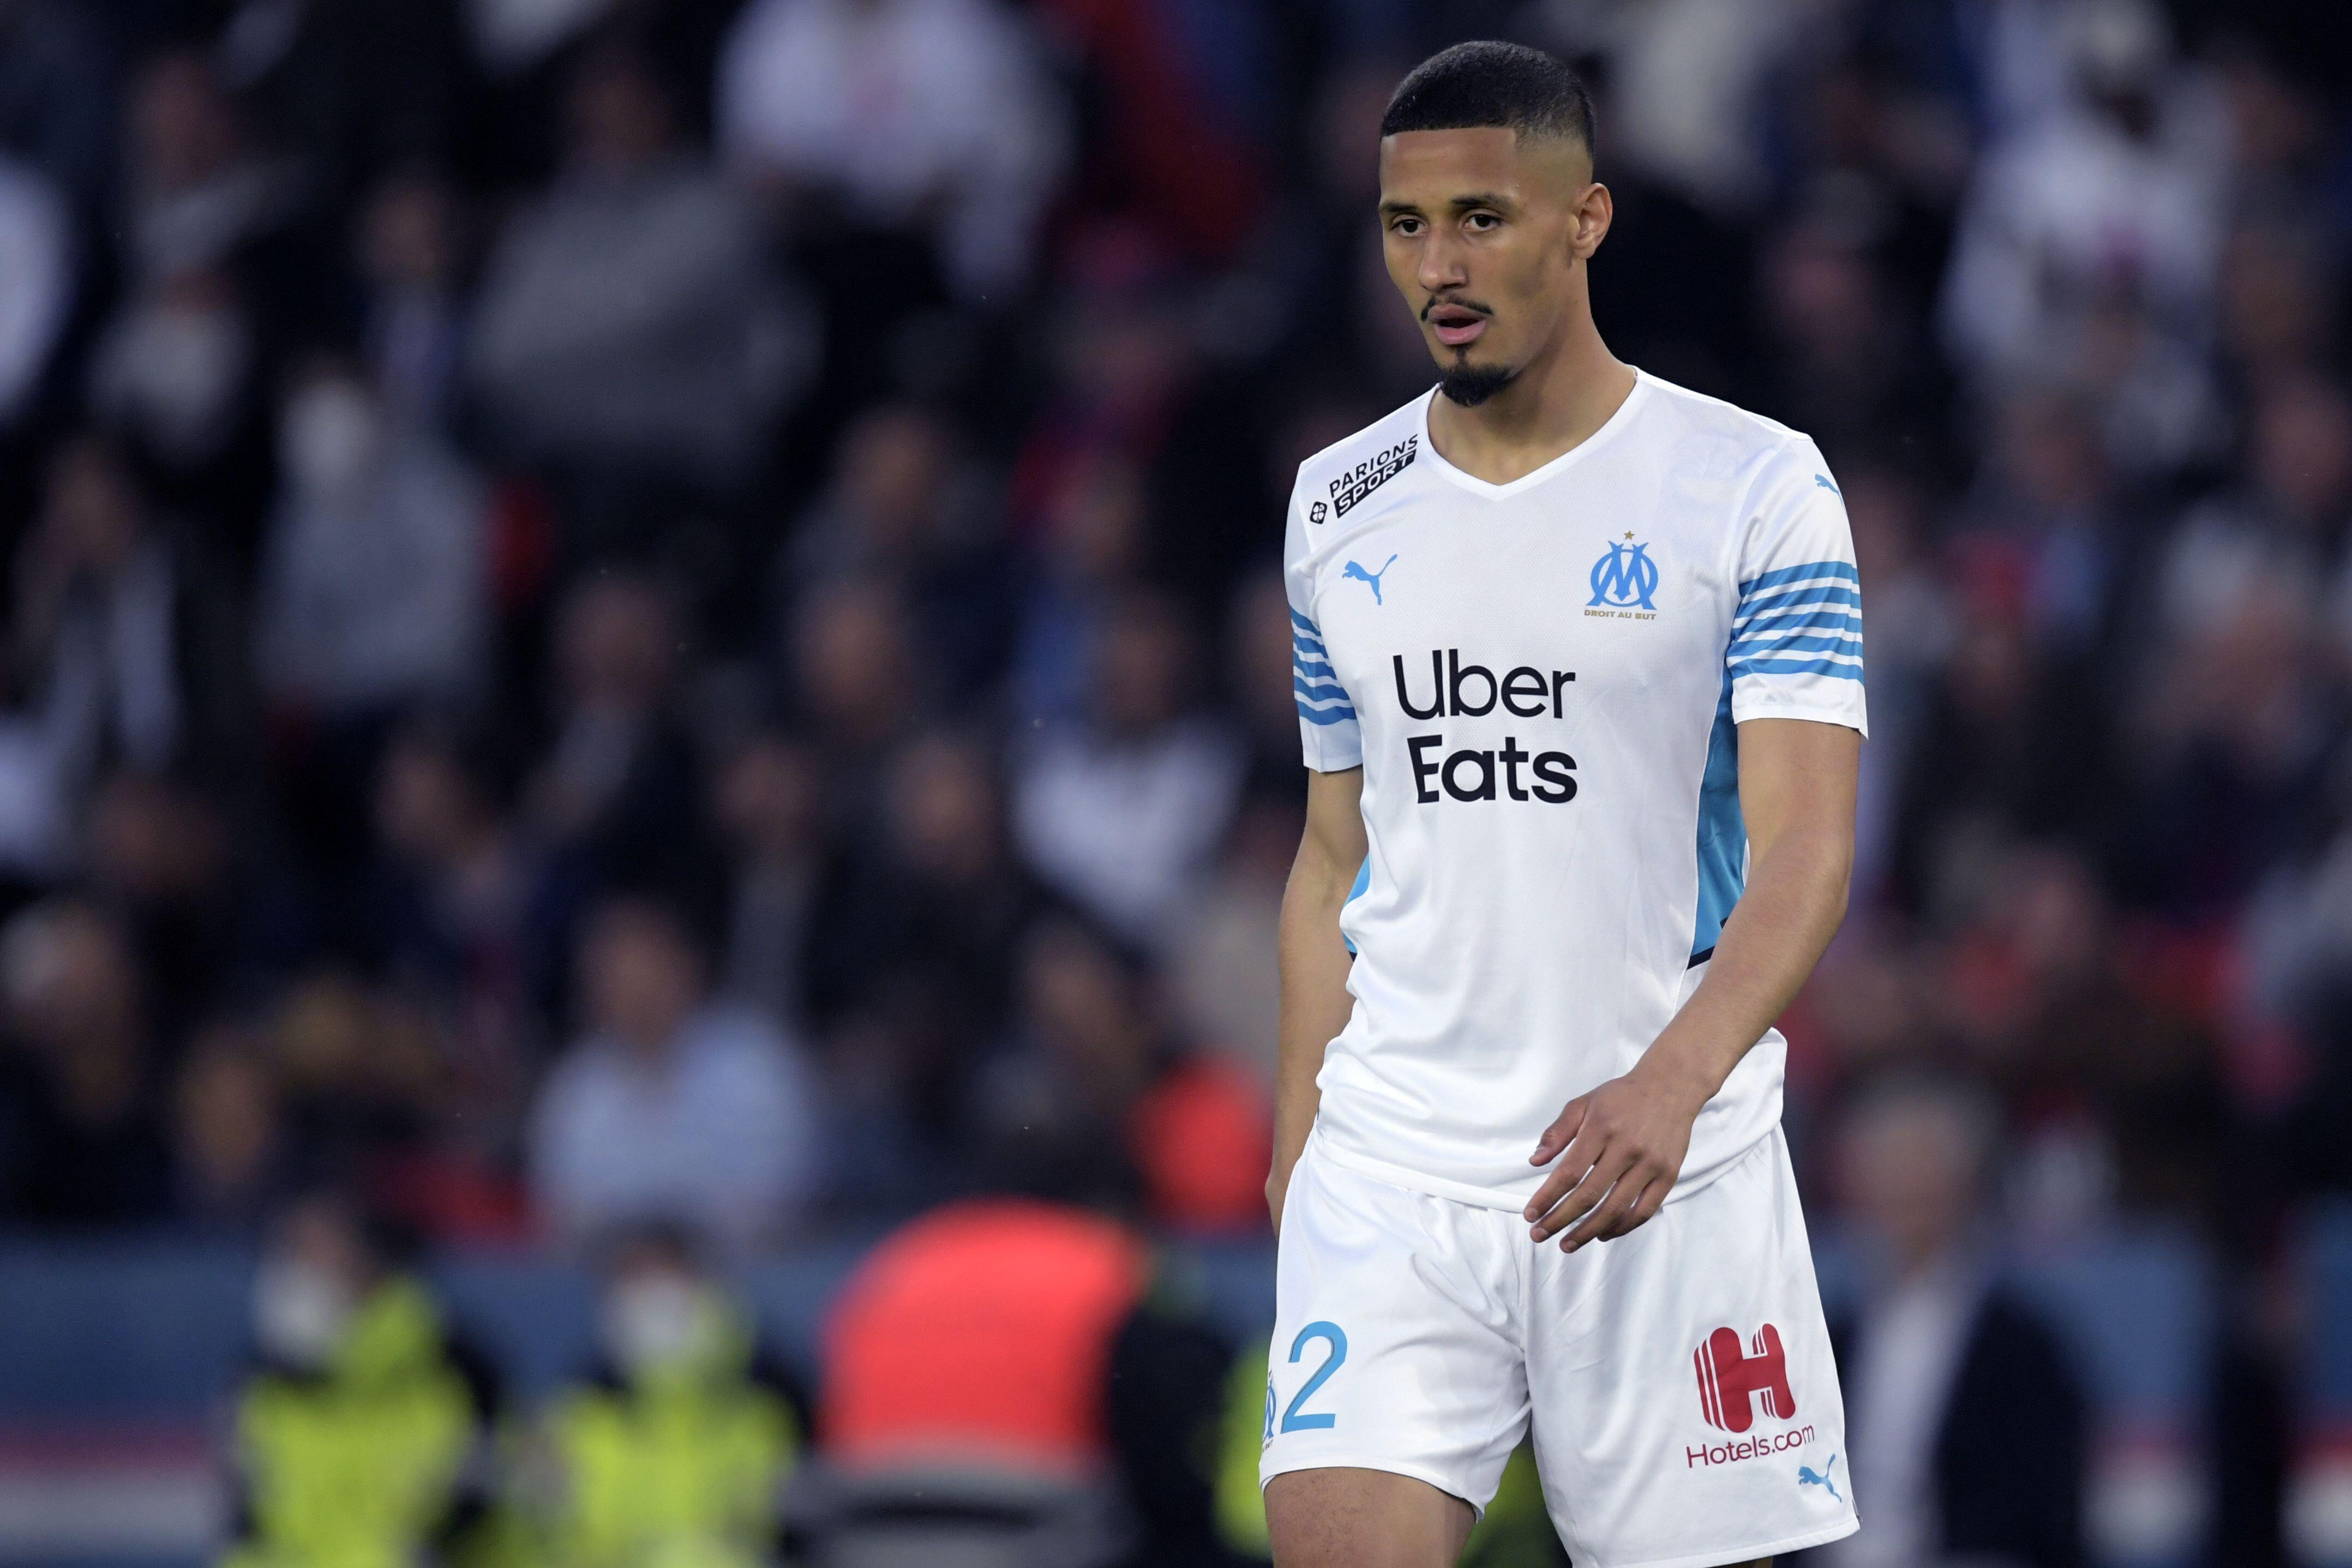 Saliba was named in the Ligue 1 team of the year during his stay at Marseille.